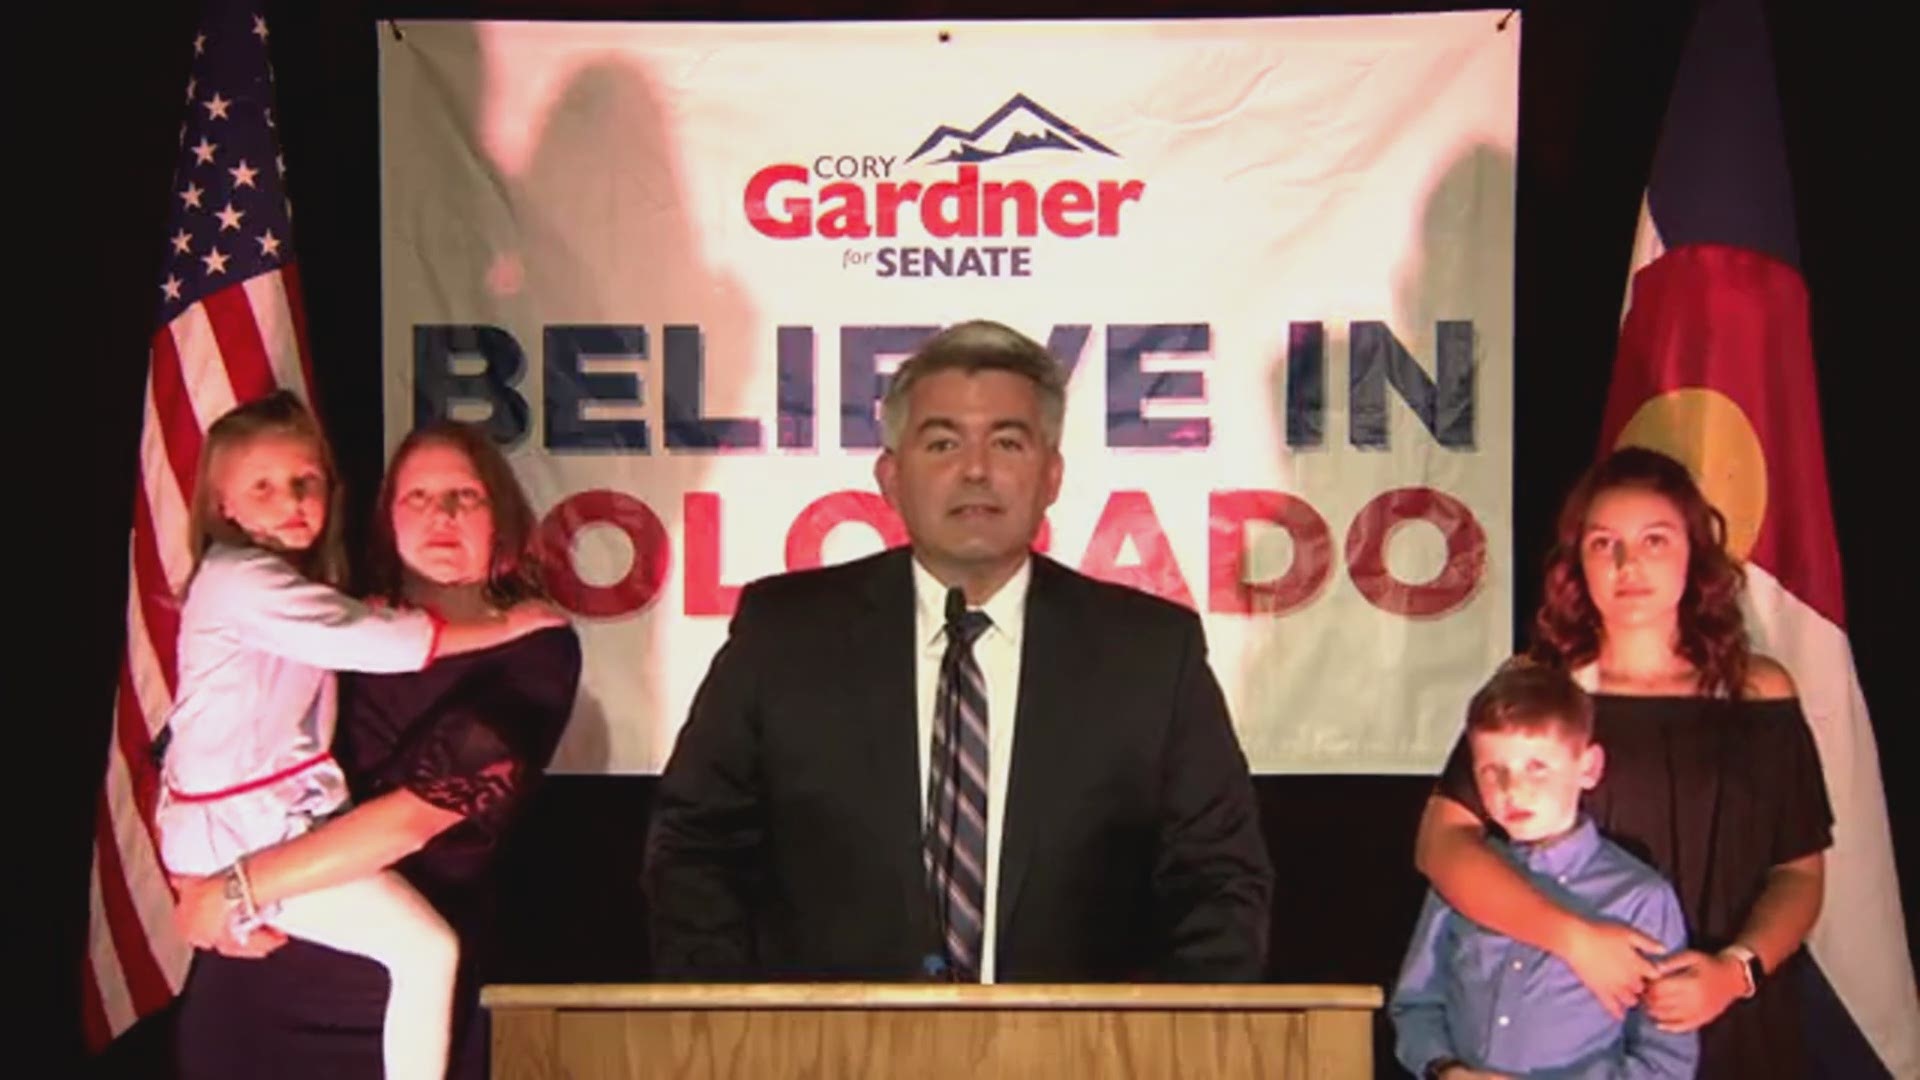 Republican Cory Gardner conceded to Democrat John Hickenlooper in the U.S. Senate race less than an hour after polls closed on election day.